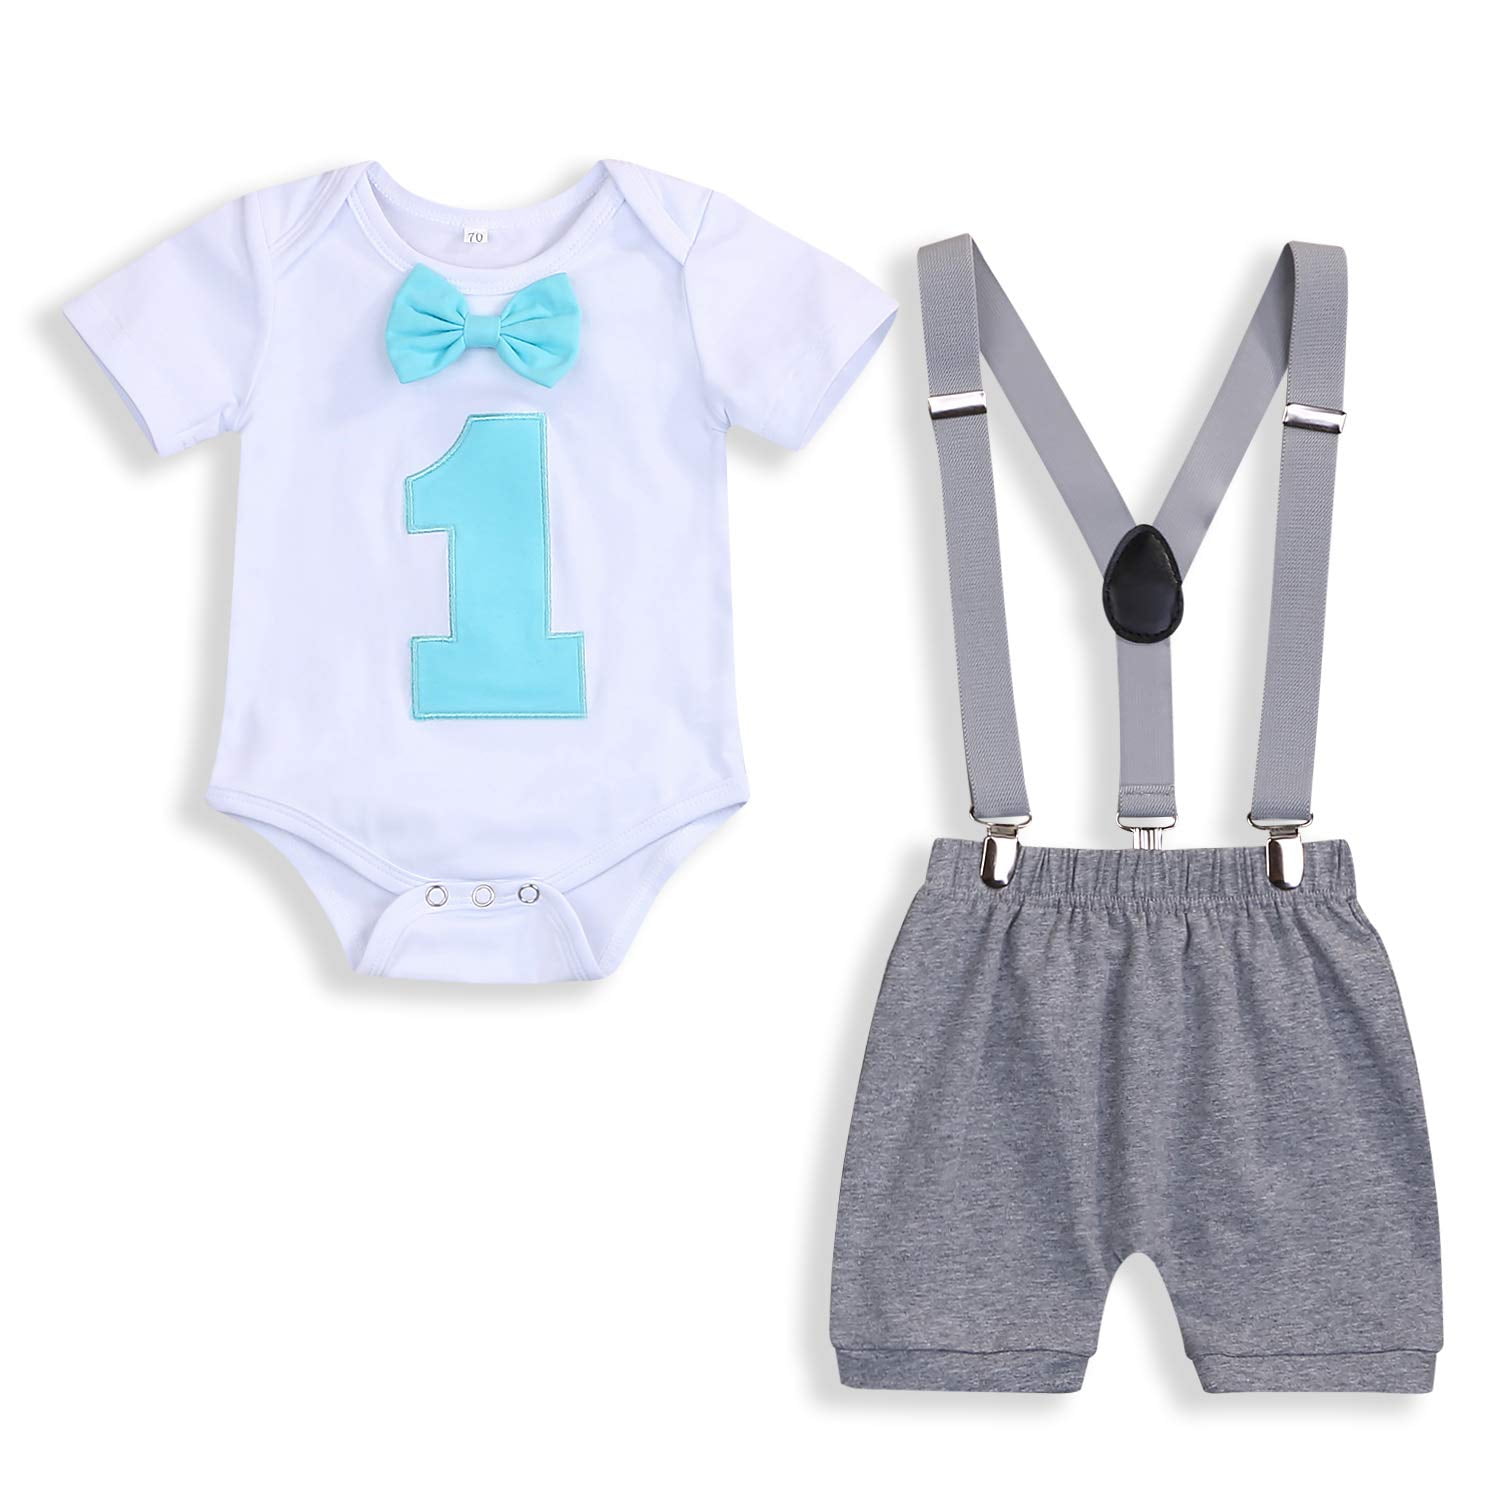 Baby Boys First 1st Birthday Outfit set Bodysuit bow tie Shorts Blue Cake Smash